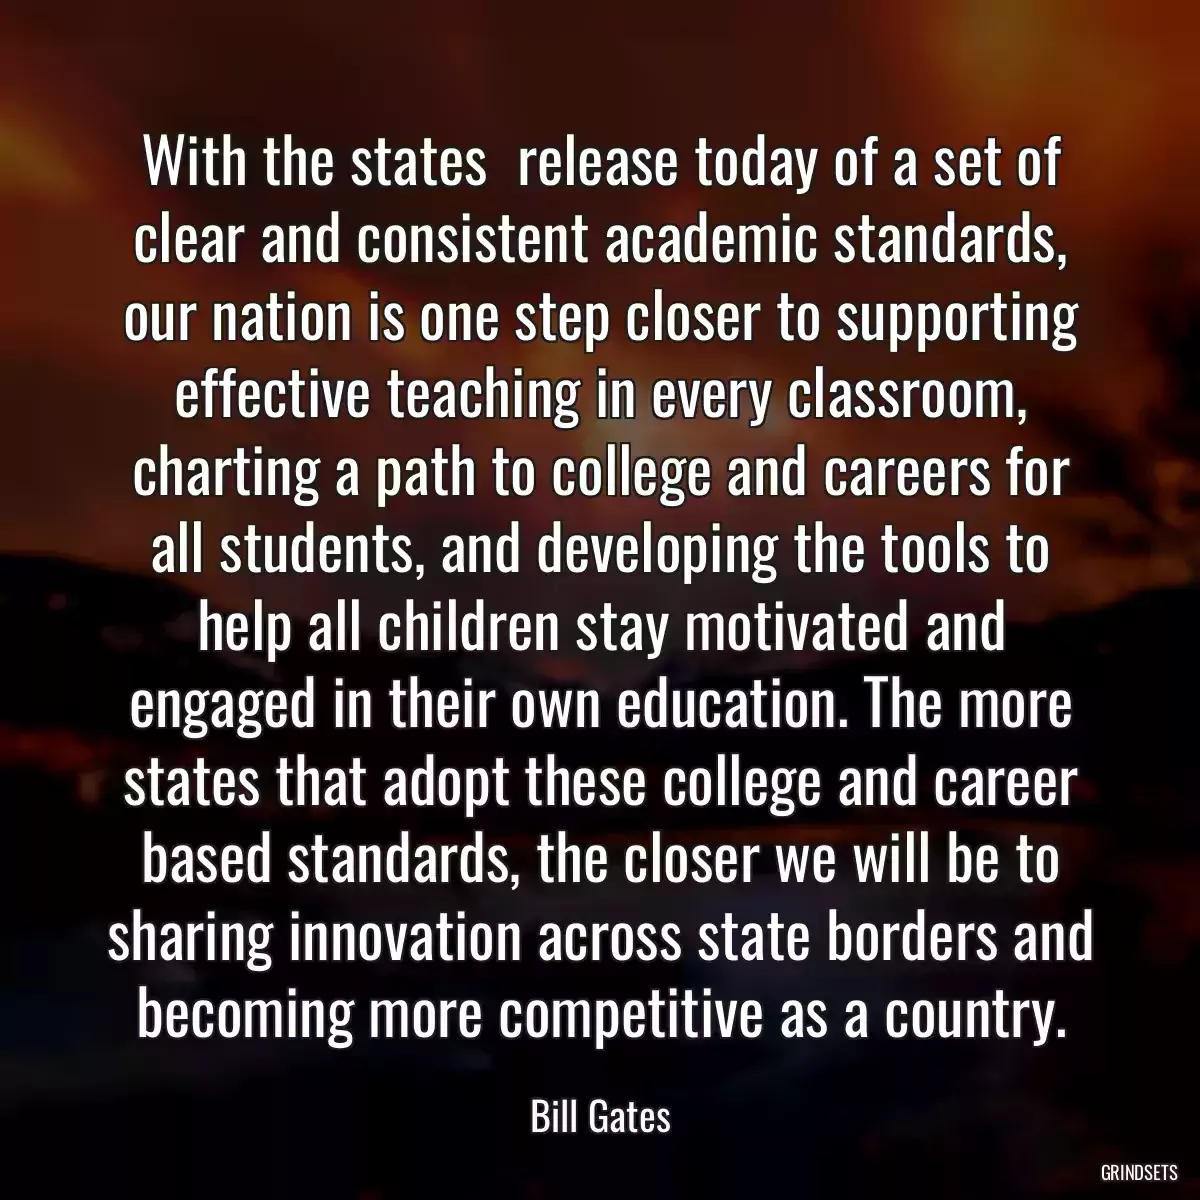 With the states  release today of a set of clear and consistent academic standards, our nation is one step closer to supporting effective teaching in every classroom, charting a path to college and careers for all students, and developing the tools to help all children stay motivated and engaged in their own education. The more states that adopt these college and career based standards, the closer we will be to sharing innovation across state borders and becoming more competitive as a country.